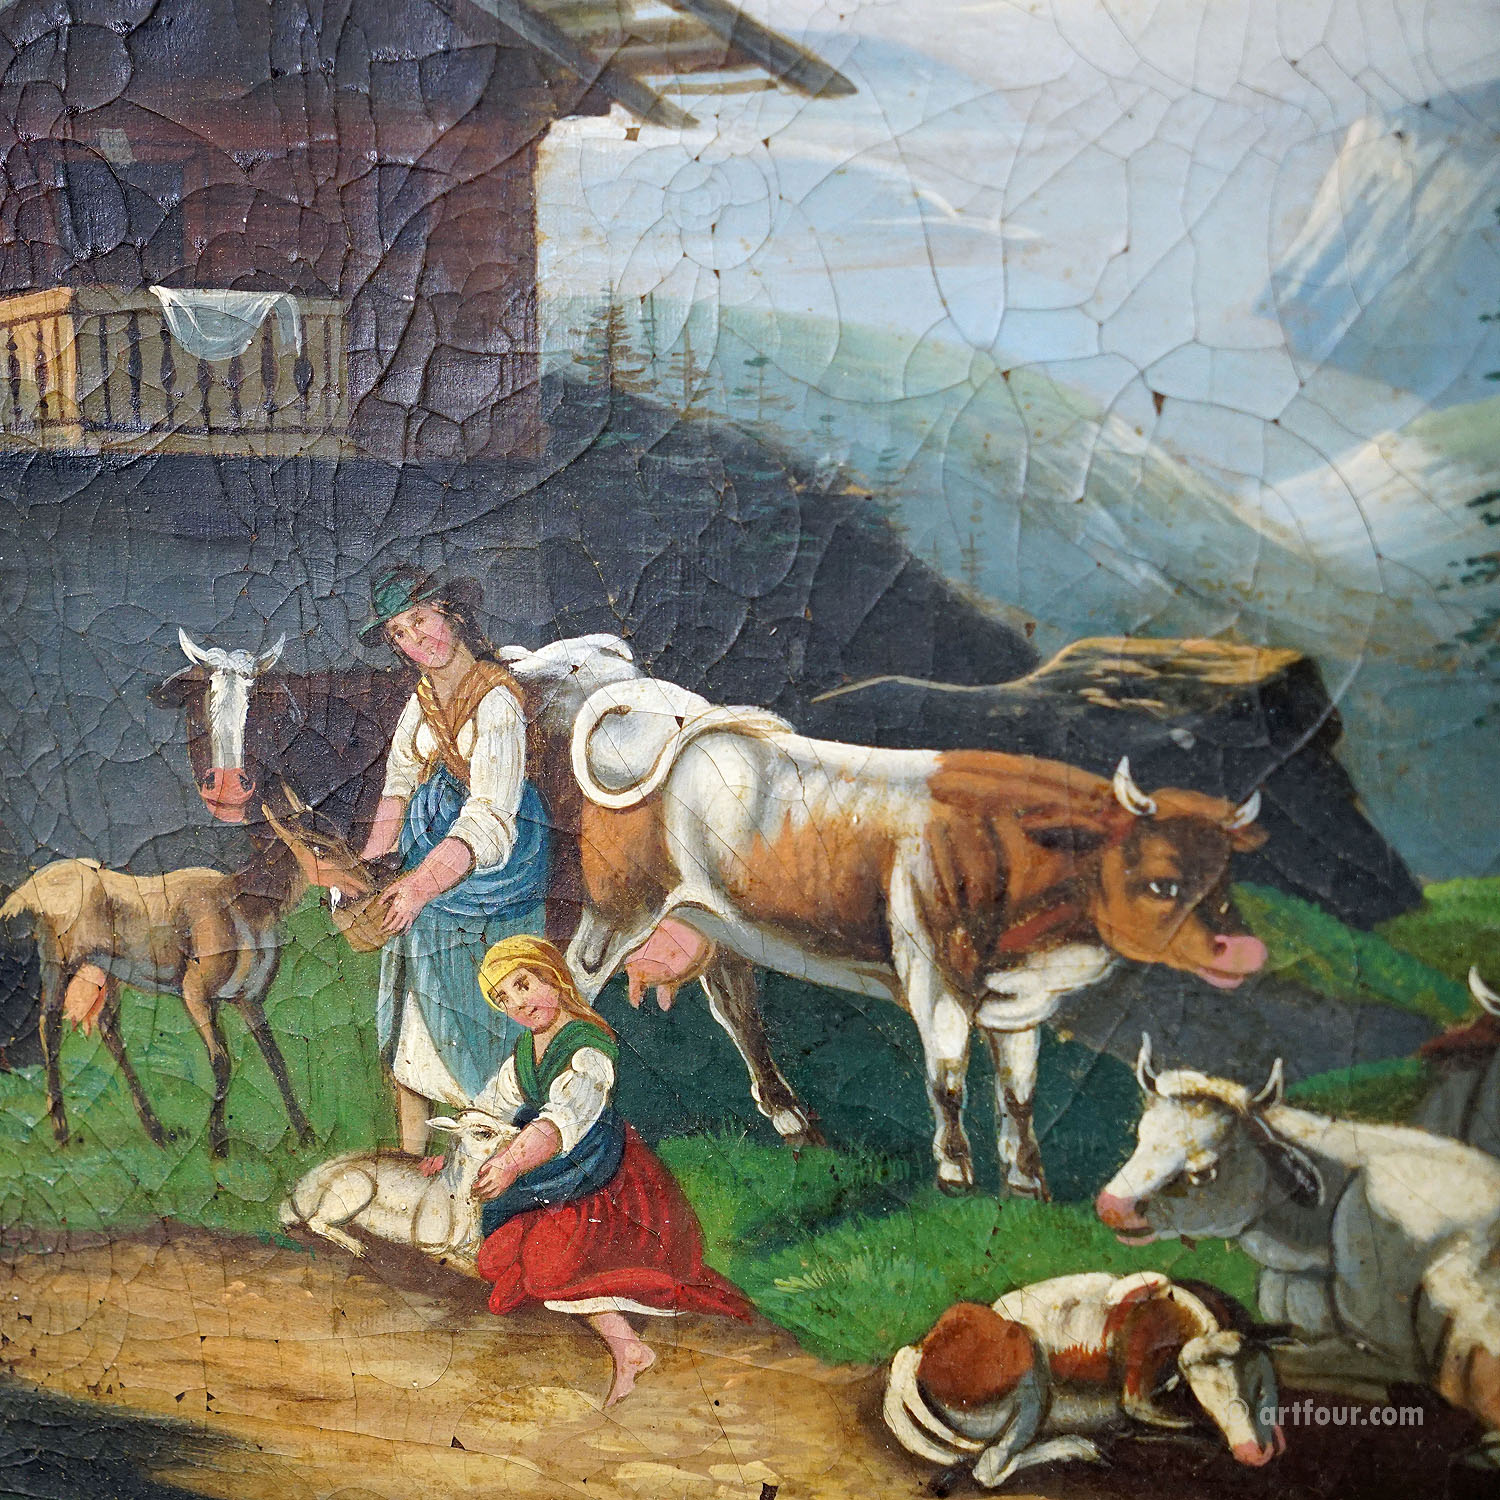 Unknown - Folksy Scenery with Cattles, Goats and Farmer's Wifes, ca. 1900s